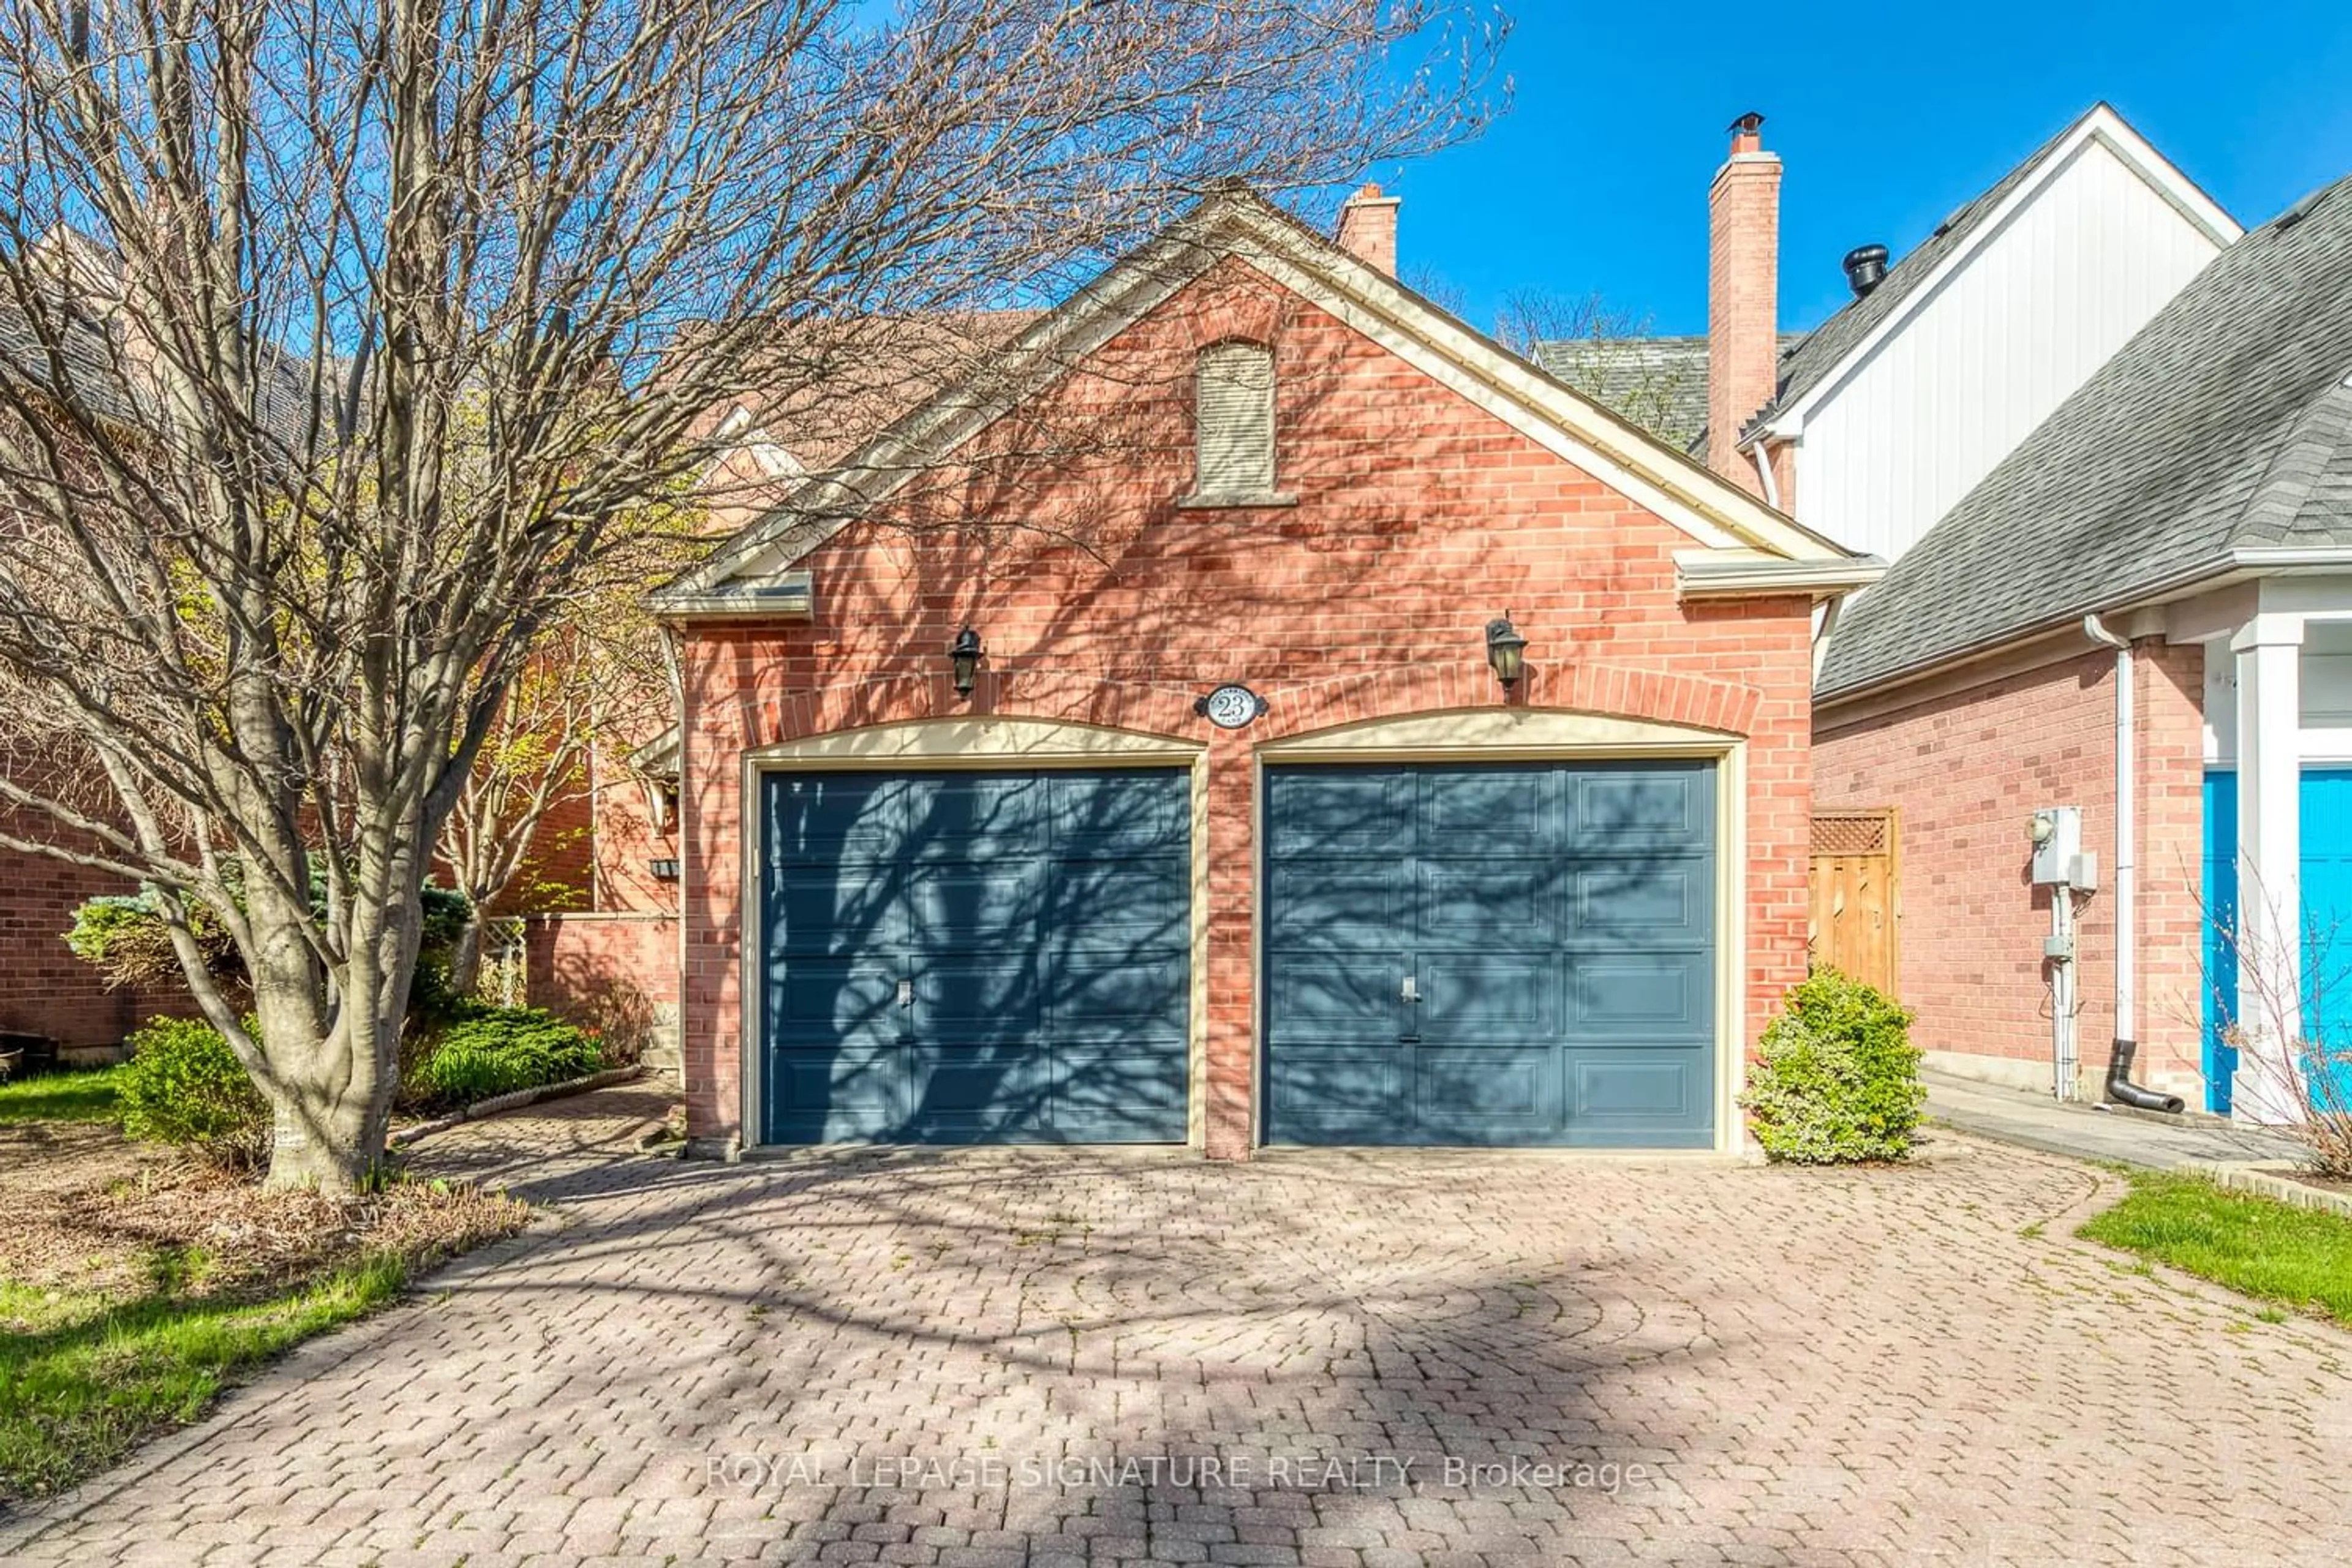 Home with brick exterior material for 23 Waterbridge Lane, Markham Ontario L3R 8W9